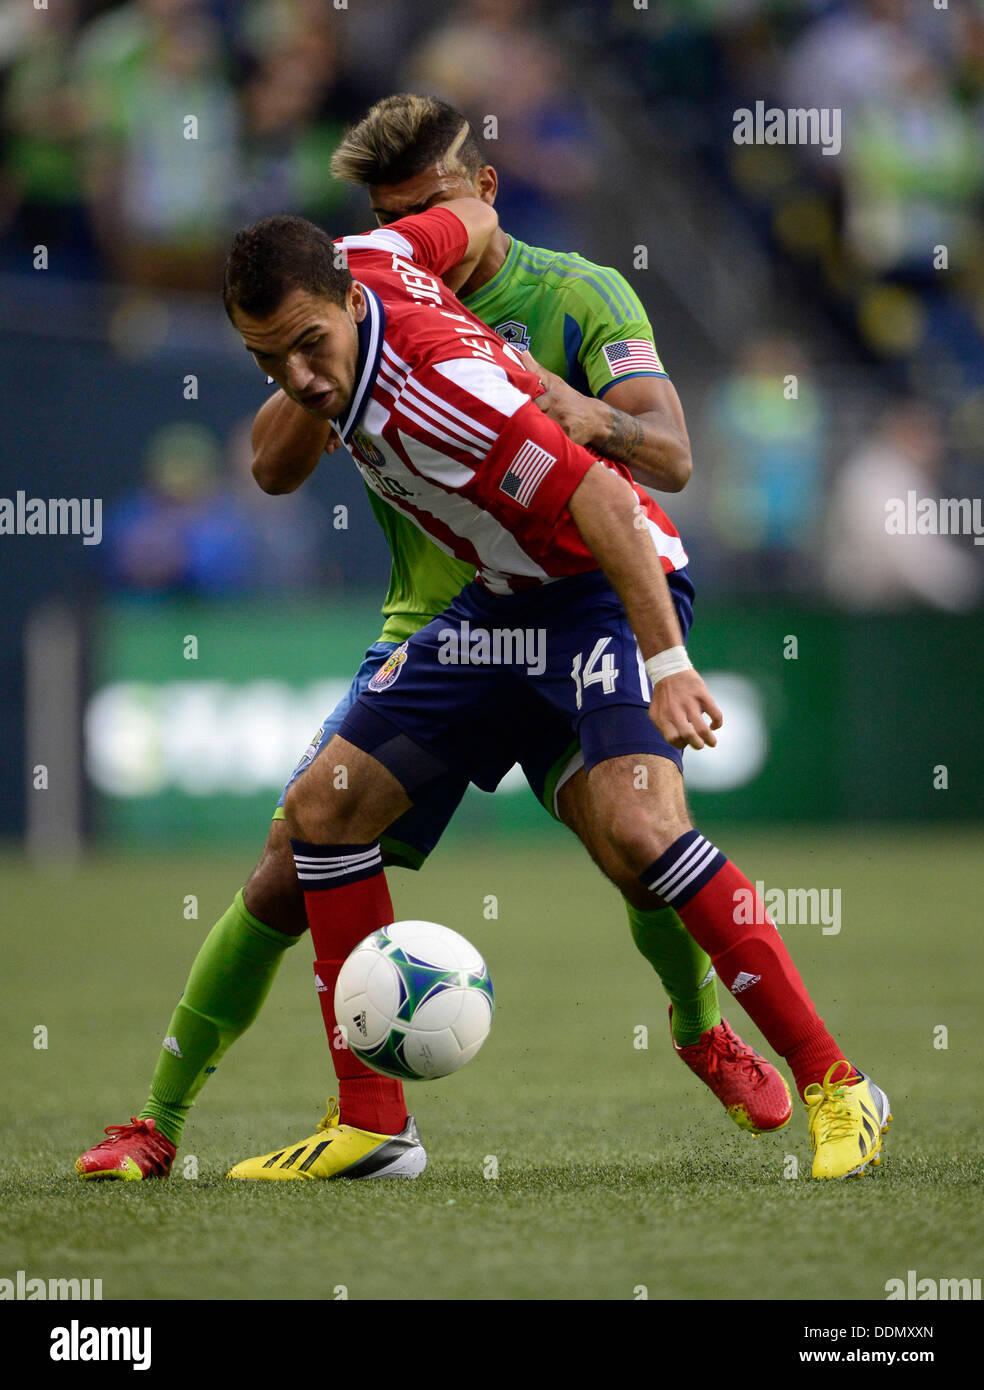 Seattle, Washington, USA. 04th Sep, 2013. Seattle Sounders FC defender DeAndre Yedlin #17 and Chivas USA forward Giovani Casillas #14 battle in action at CenturyLink Field in Seattle, WA. Seattle Sounders FC defeats Chivas USA 1 - 0 .George Holland / Cal Sport Media Credit:  Cal Sport Media/Alamy Live News Stock Photo